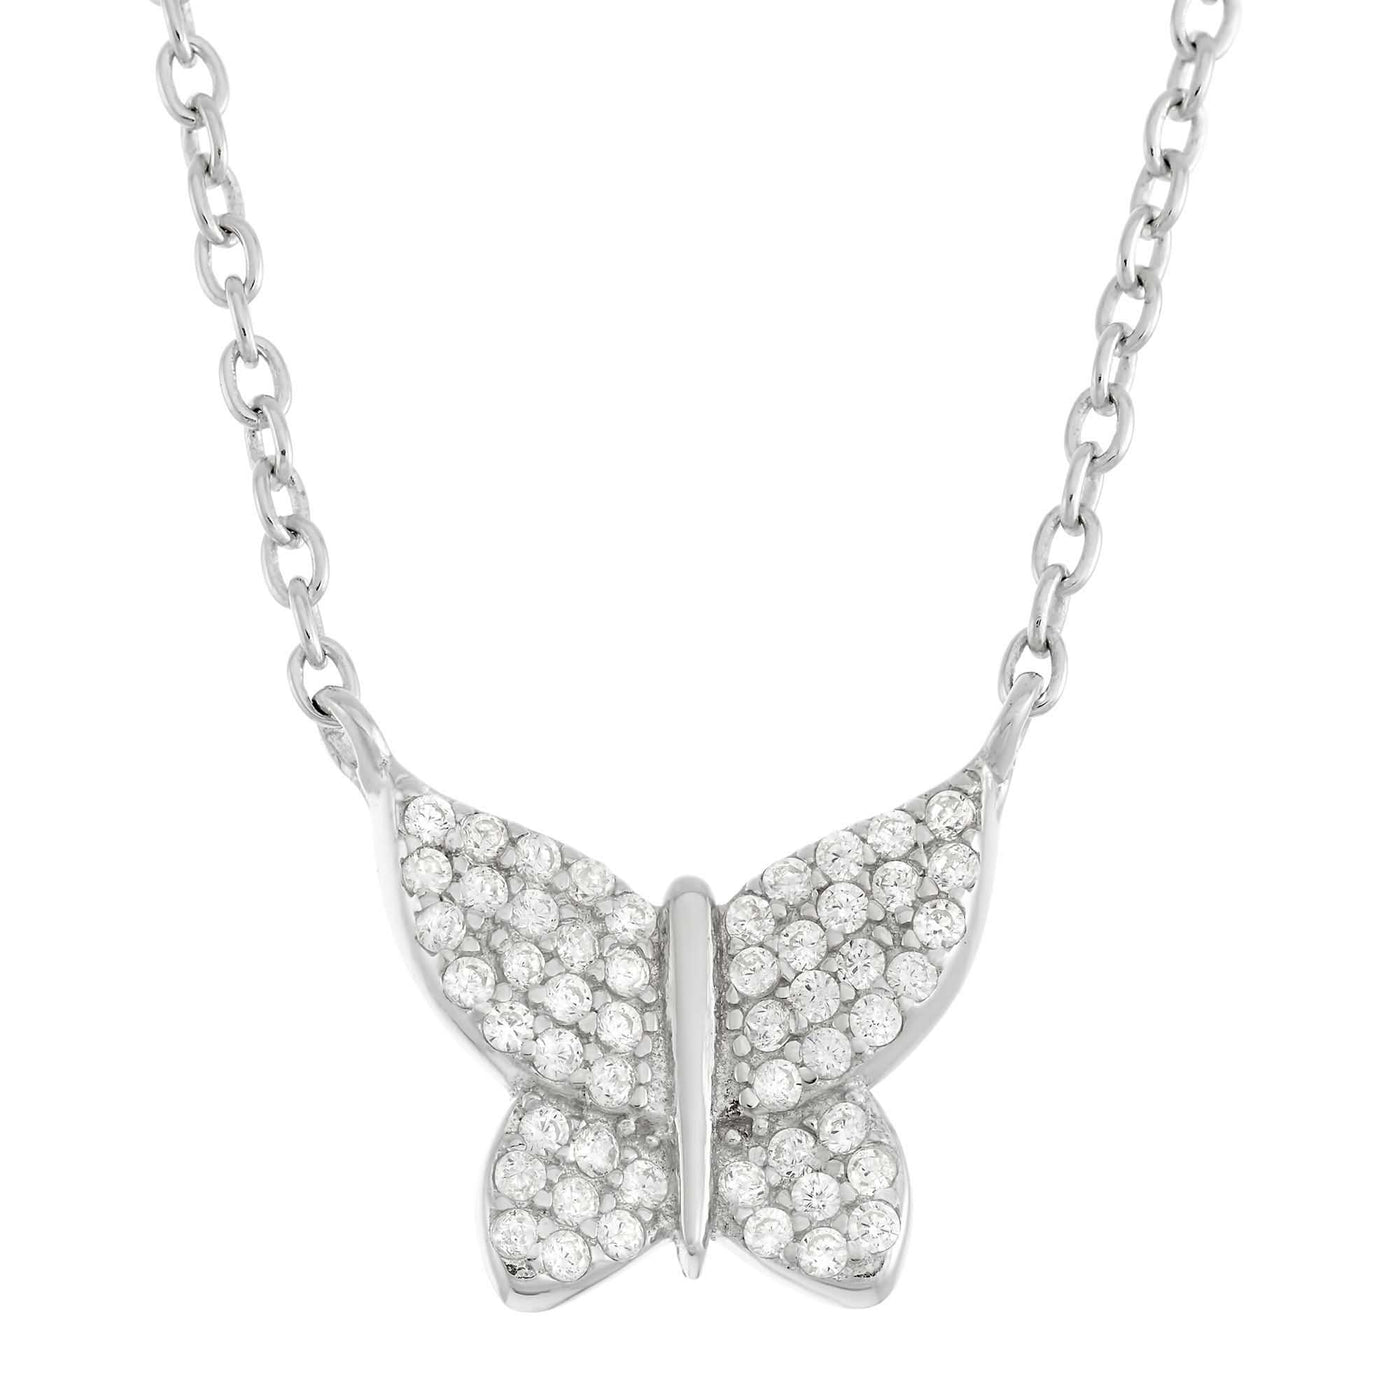 Rebecca Sloane Simple Butterfly Pendant With Cz Stones